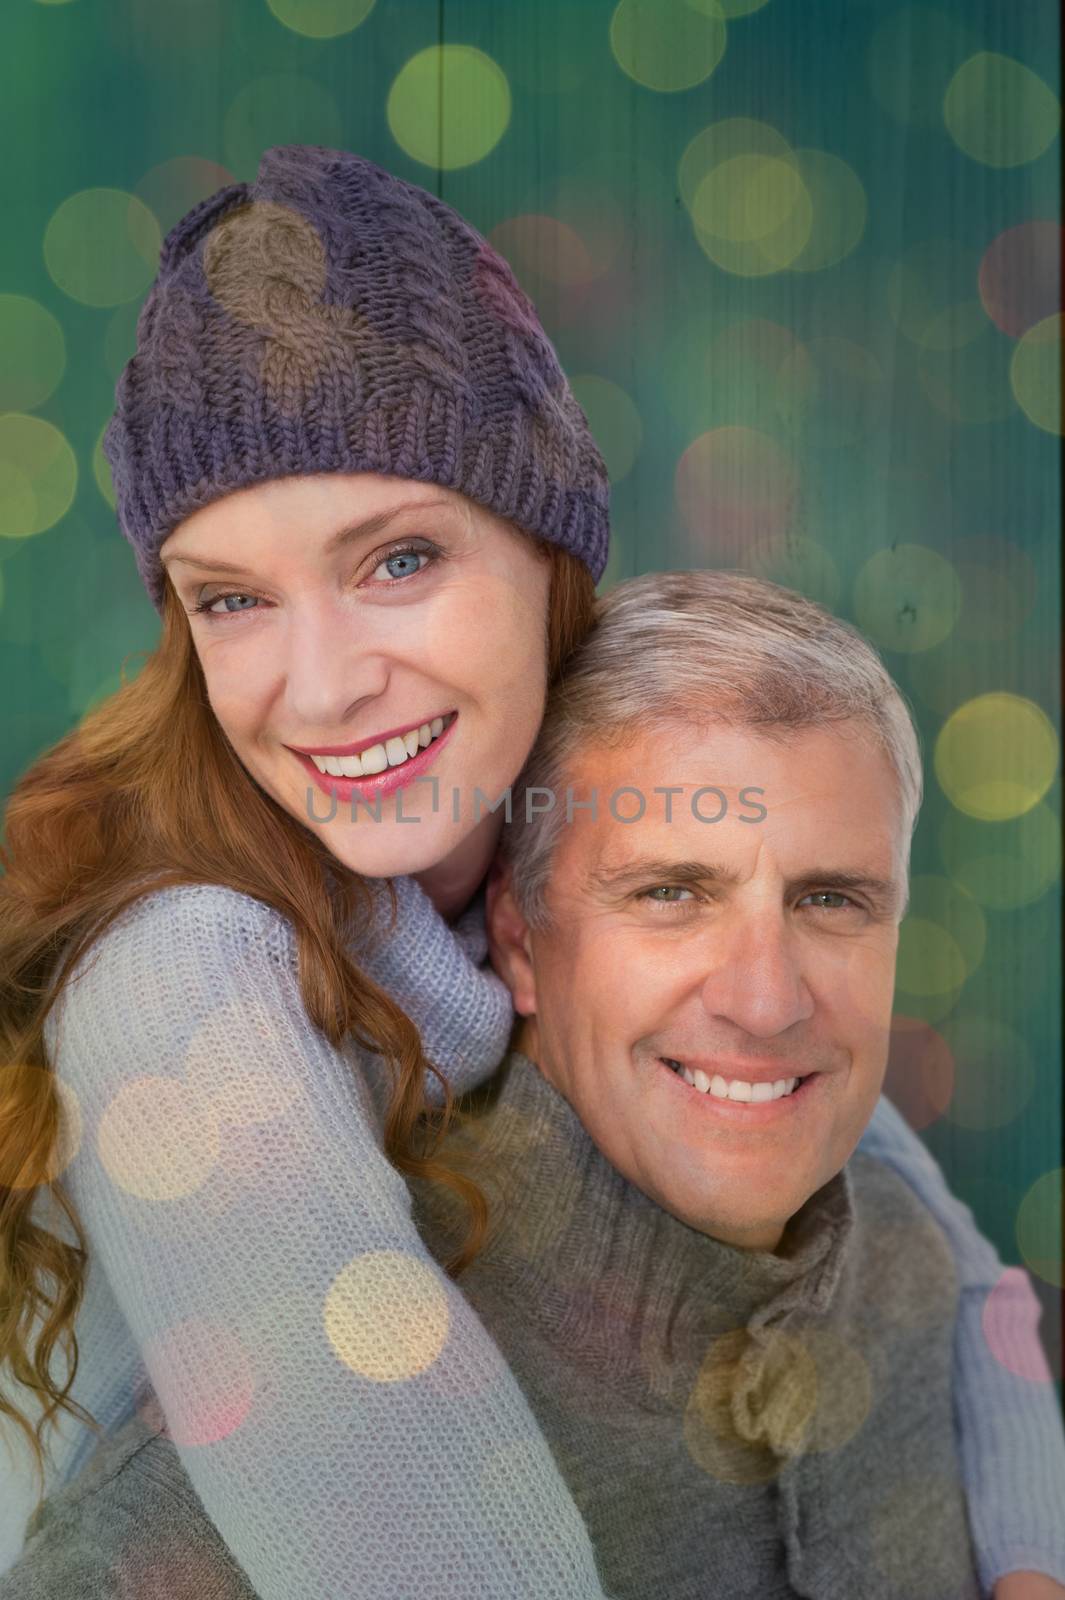 Composite image of happy couple in warm clothing by Wavebreakmedia